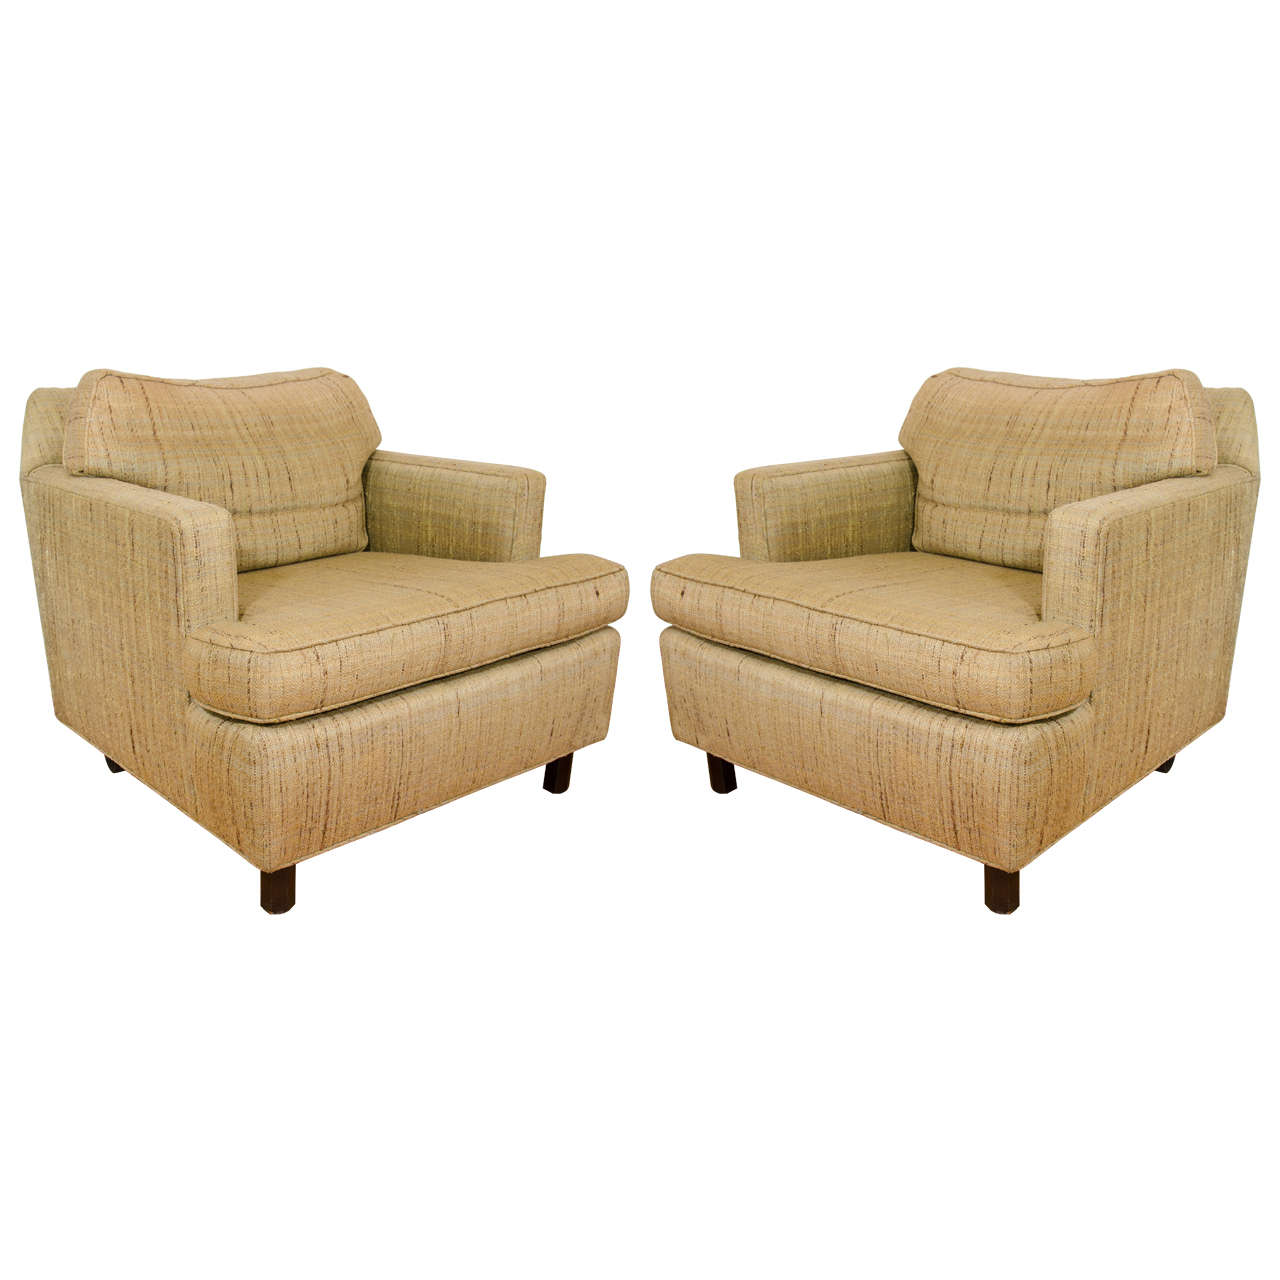 Midcentury Pair of Edward Wormley for Dunbar Lounge Chairs, Model #257